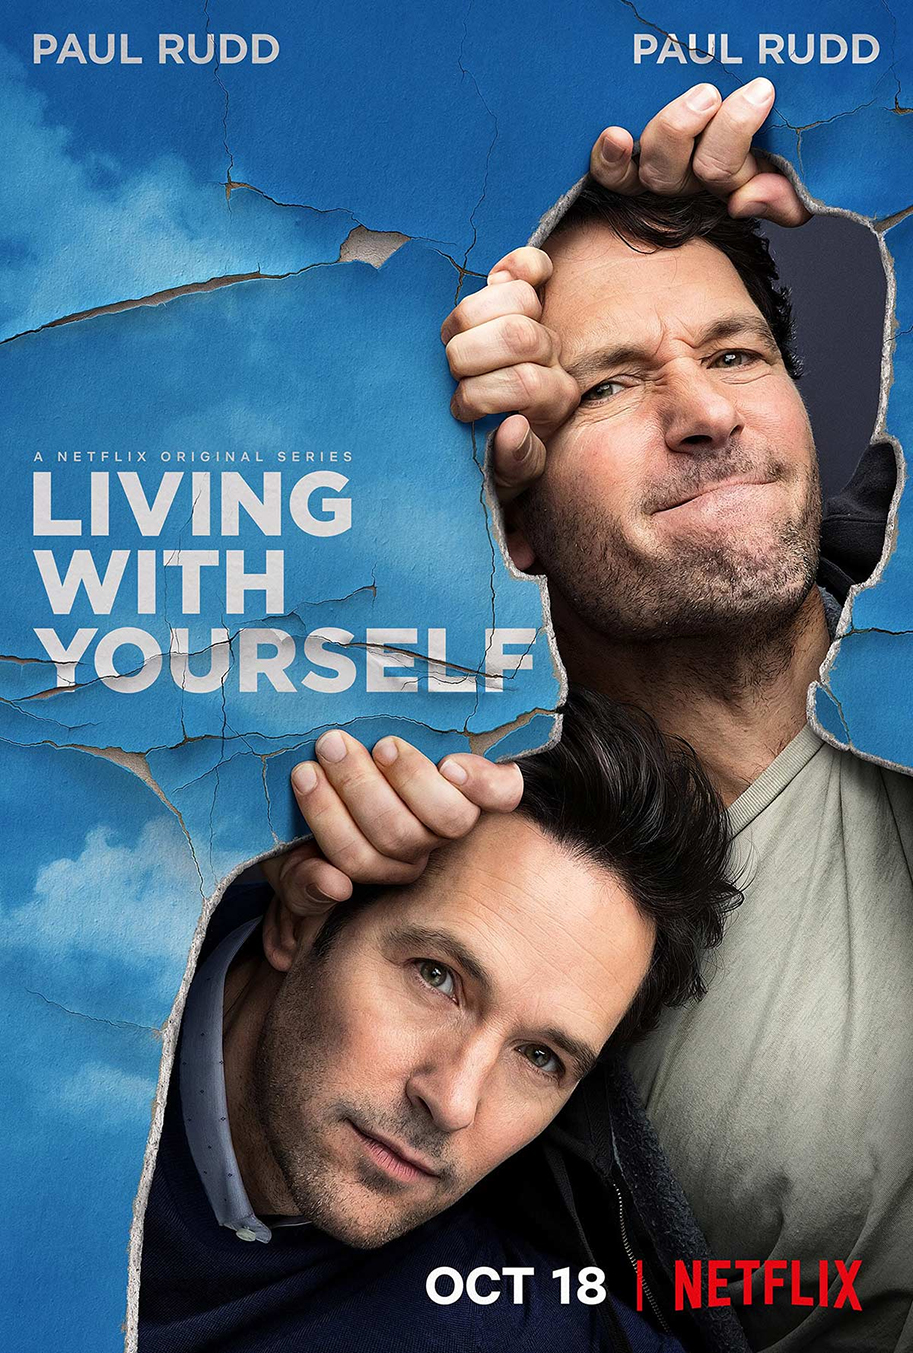 Living with Yourself, Paul Rudd, Netflix, poster